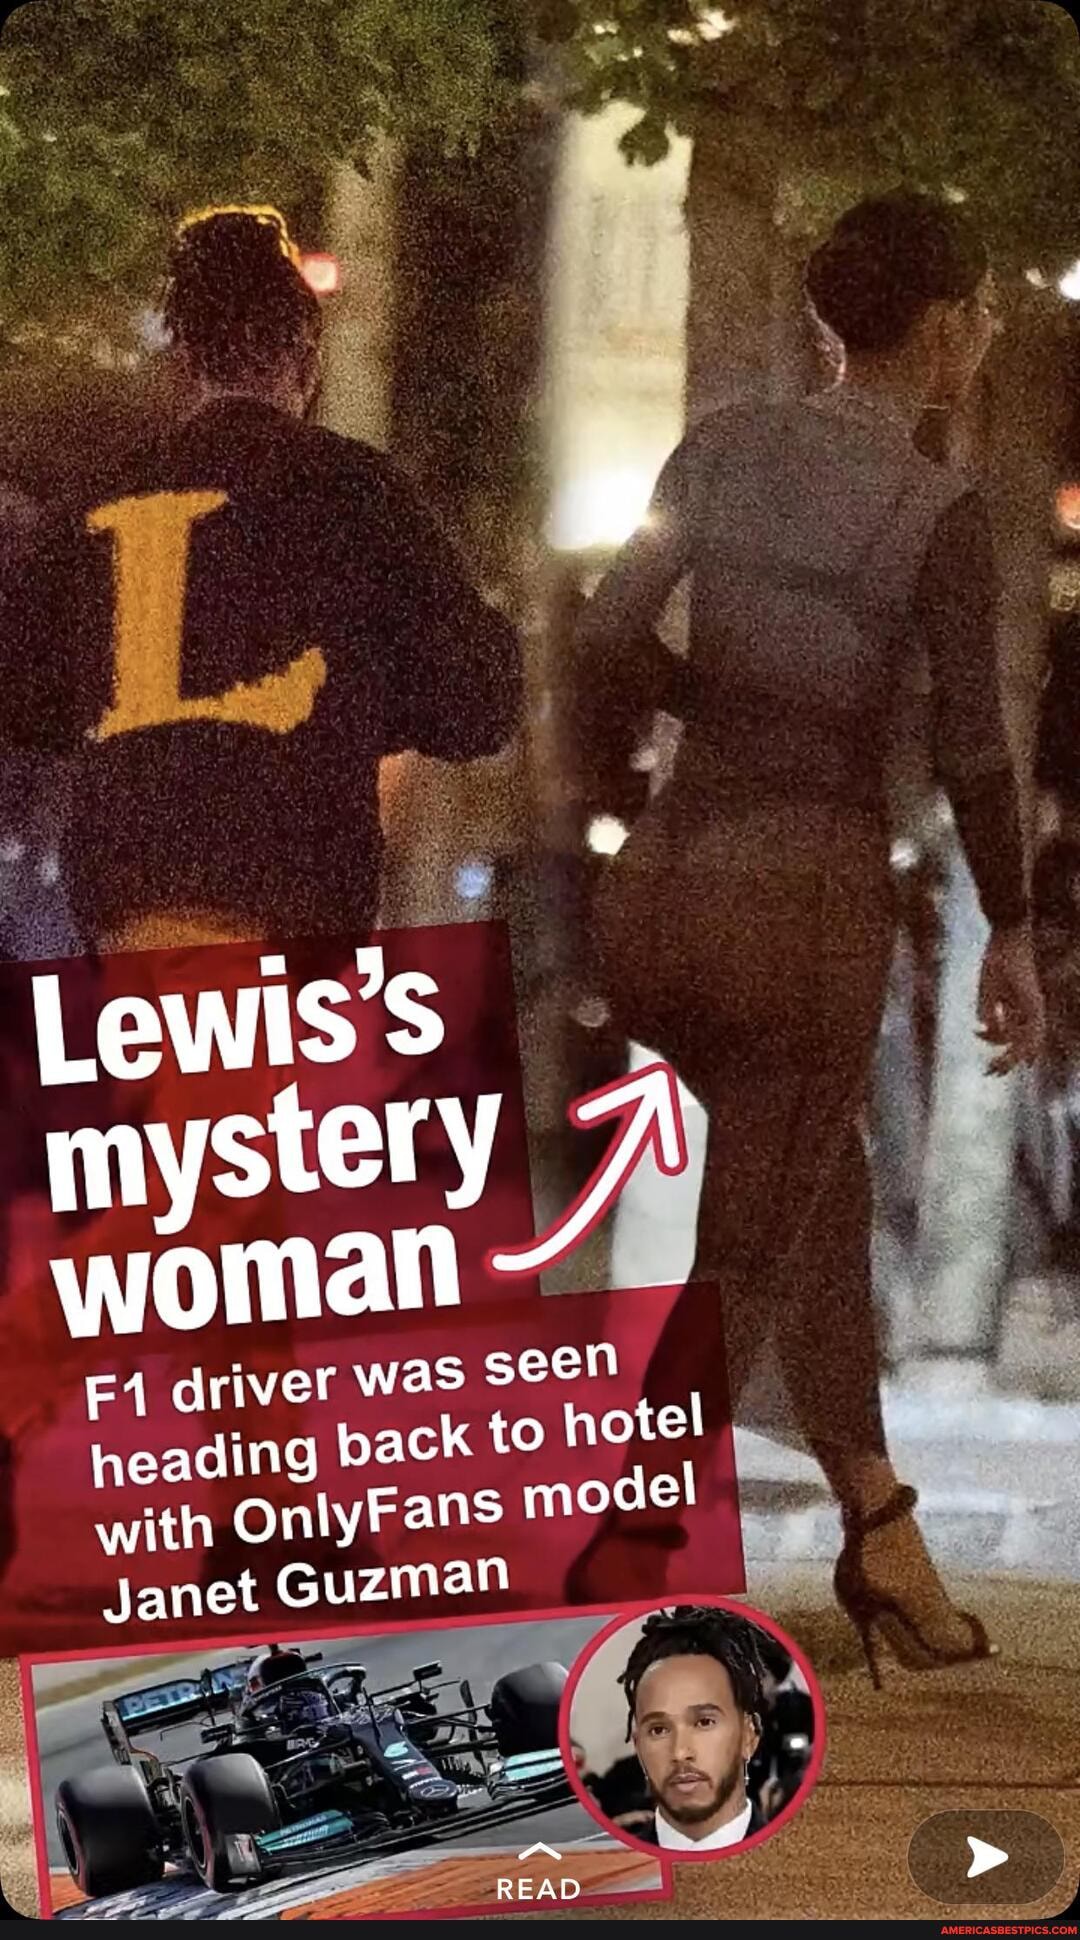 Lewis Hamilton heads back to New York hotel with OnlyFans model Janet Guzman  after F1 star attends Met Gala afterparty